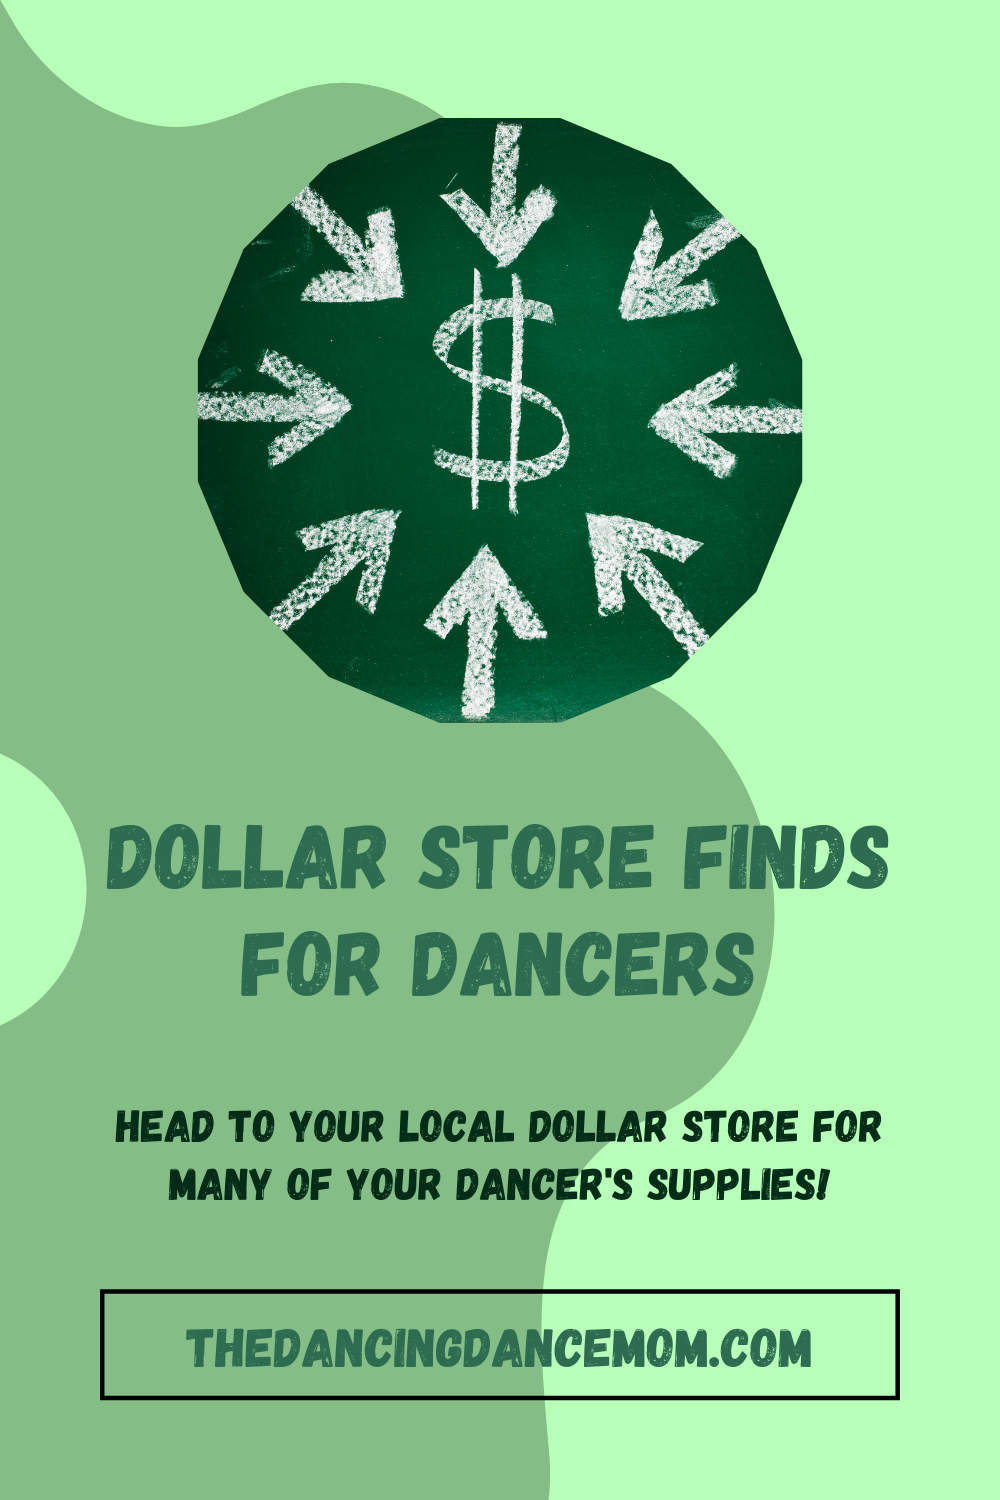 Dollar Store Finds for Dancers